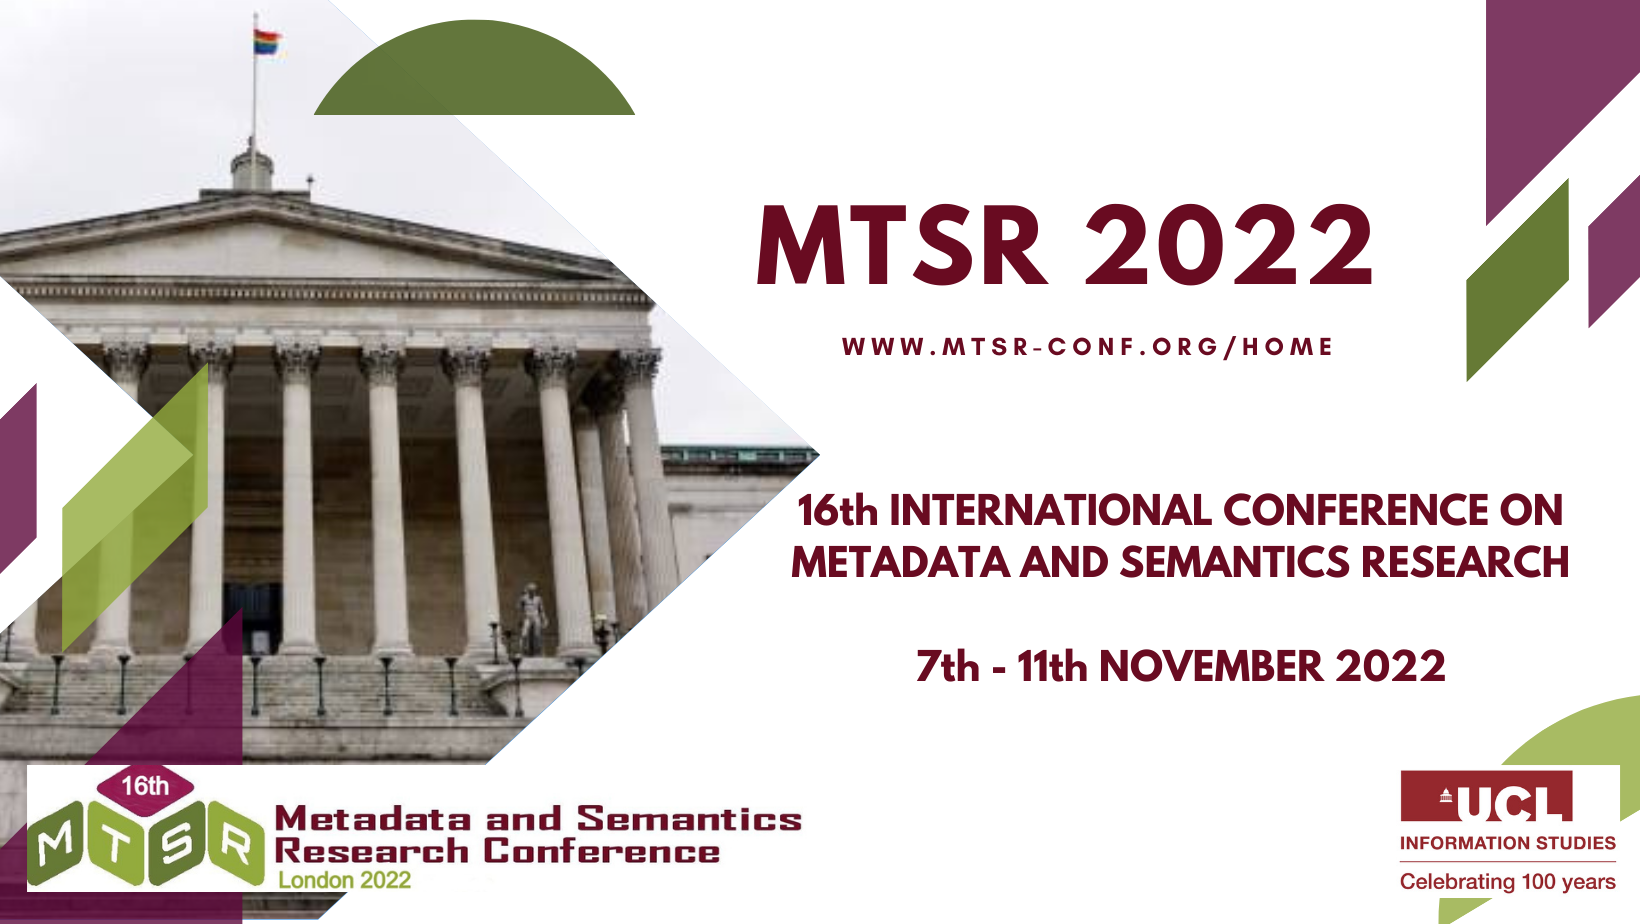 16th International Conference on Metadata and Semantics Research